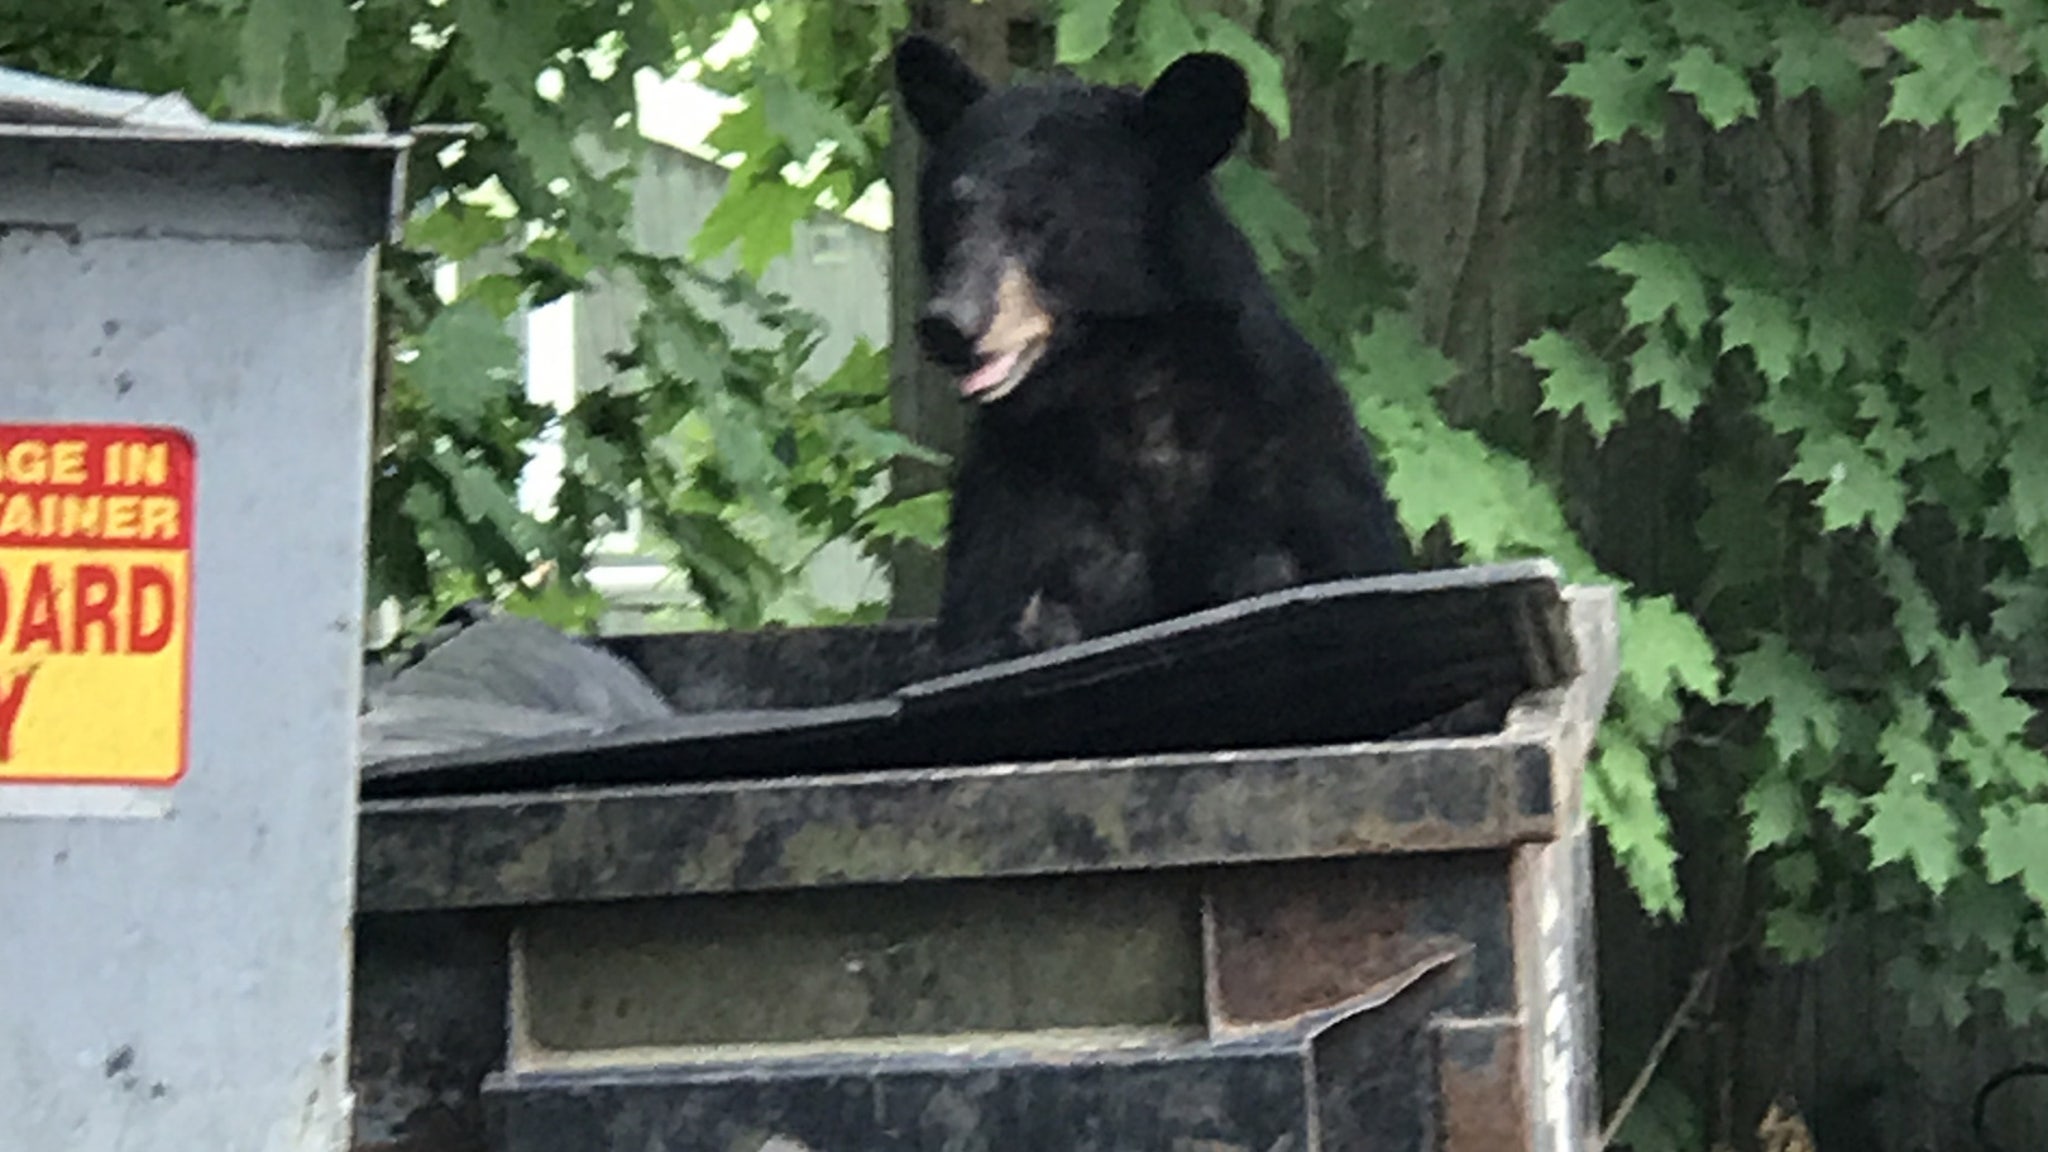 California Man Startled By Bear In Dumpster Sues